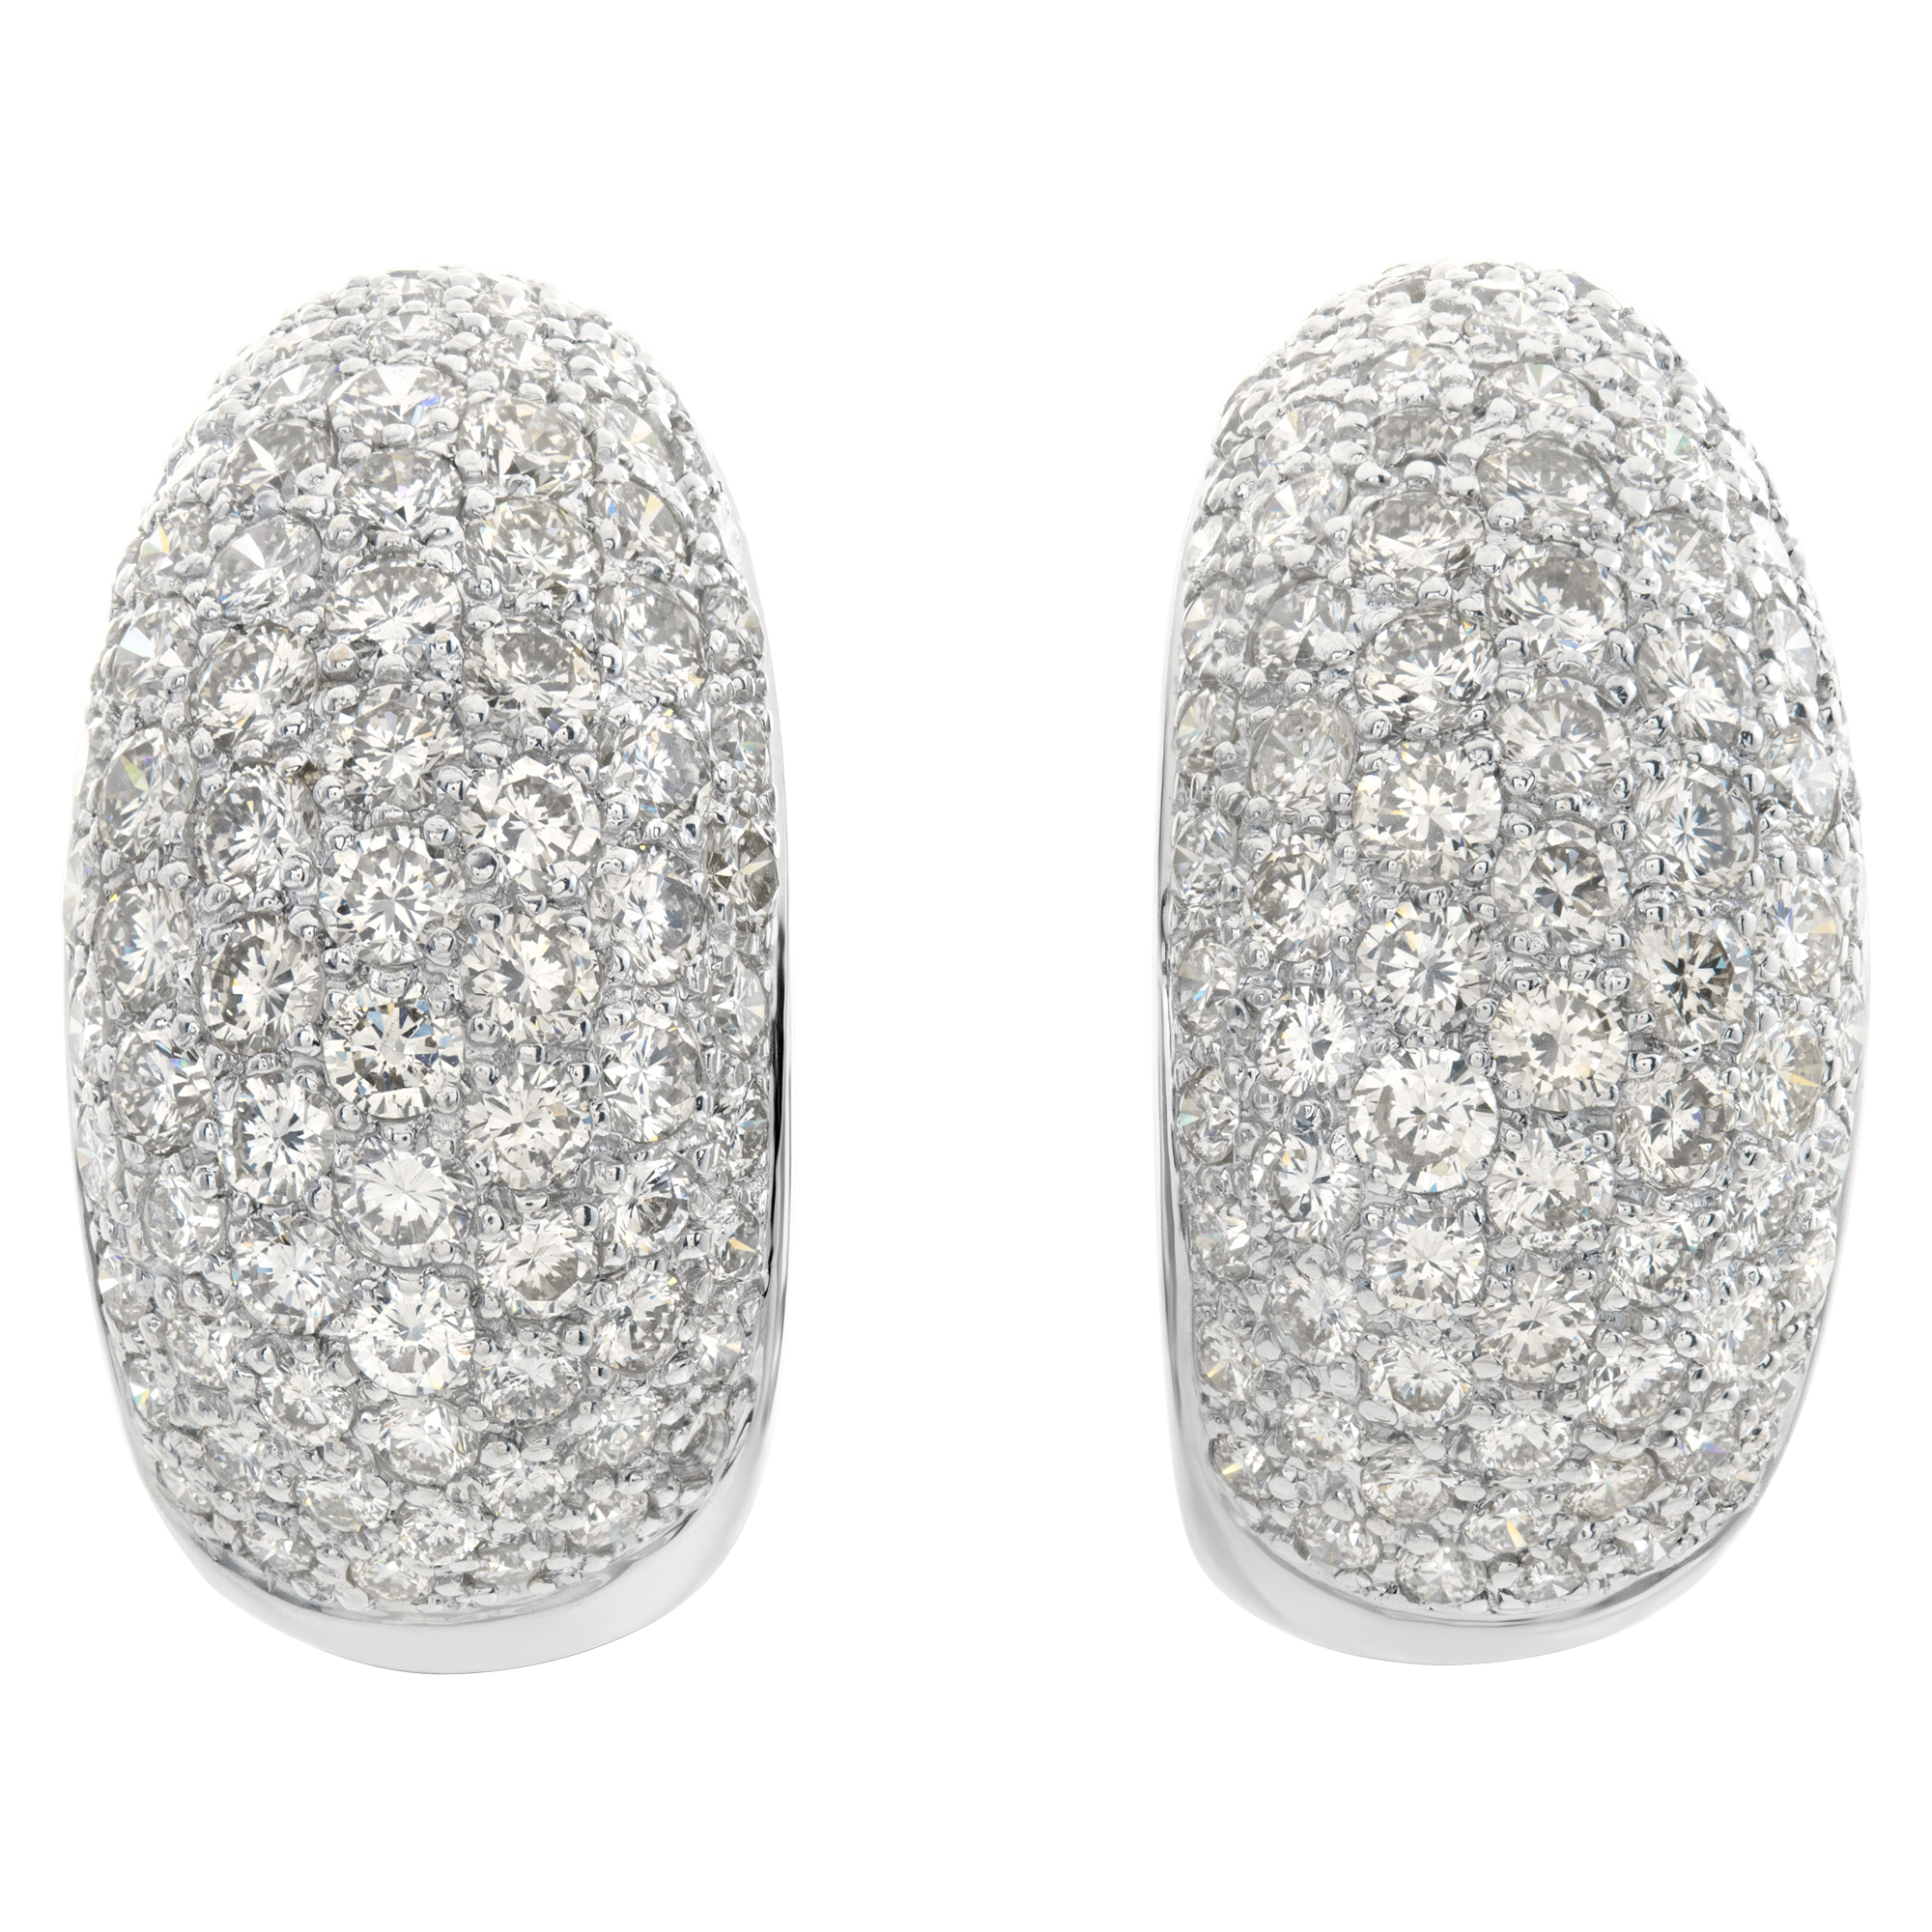 Half hoop diamonds earrings in 18k white gold. Round brilliant cut diamonds total approx. weight over 4 carats